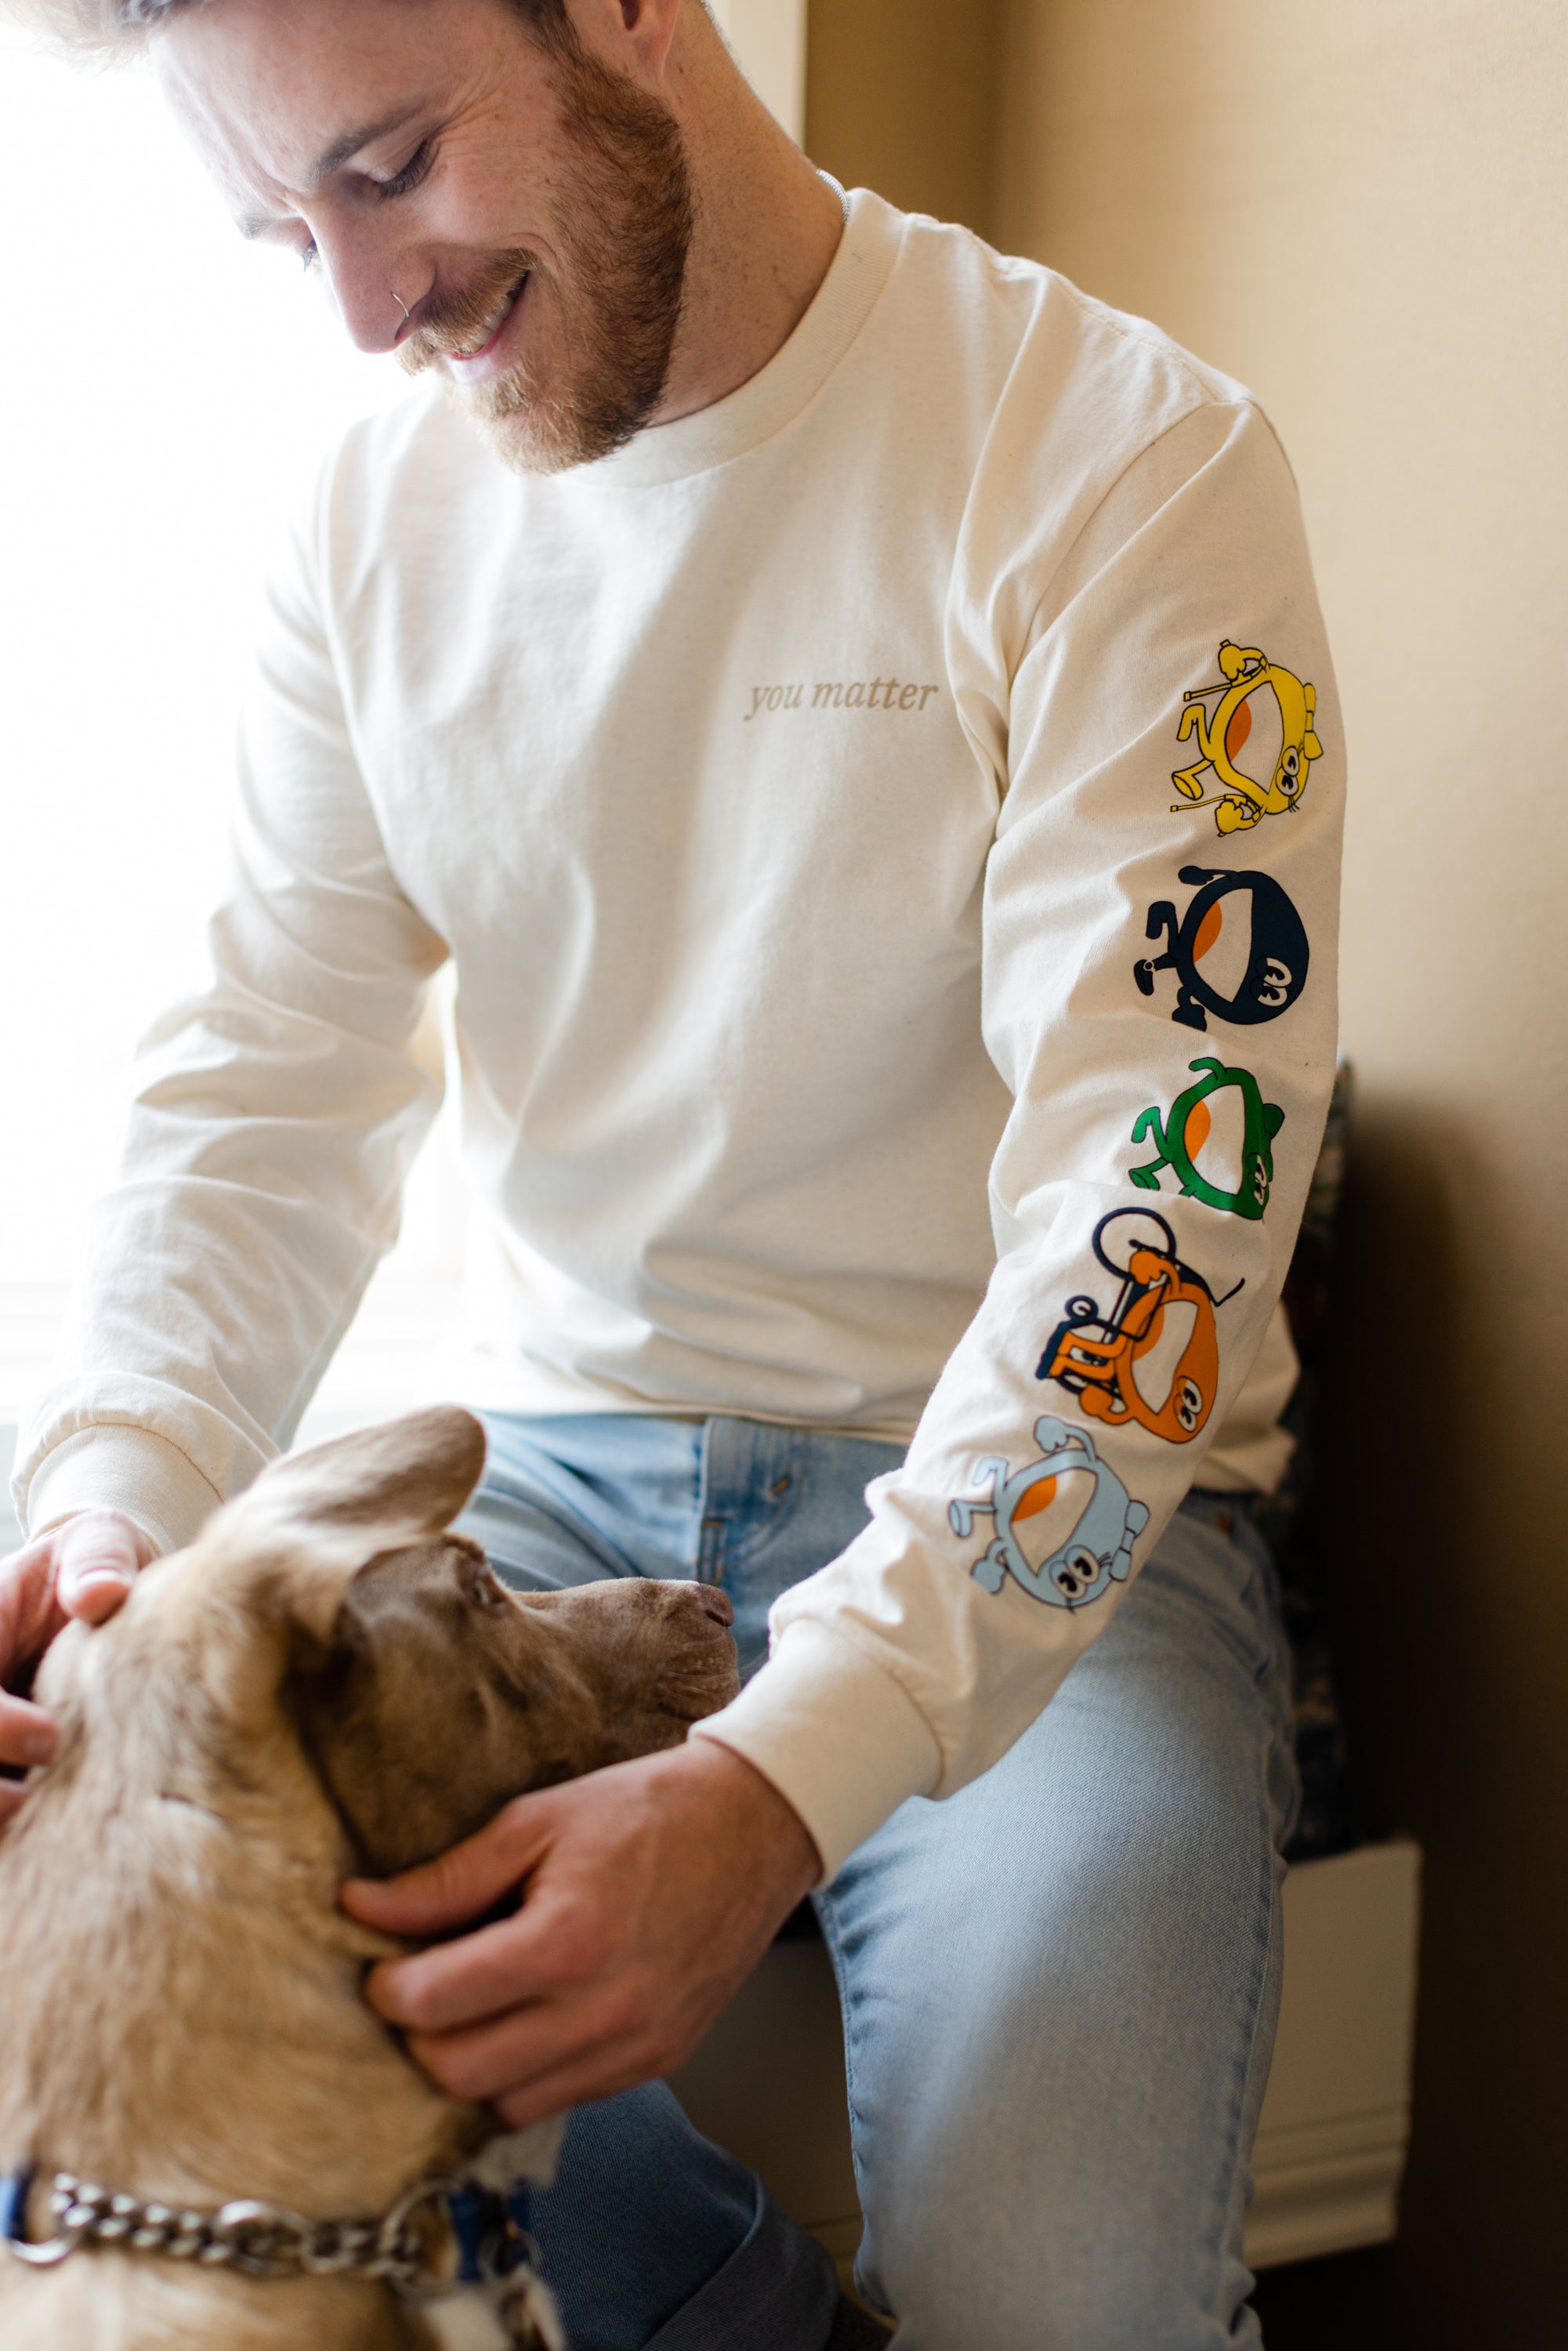 A man is sitting down by a window petting a dog. He is wearing a cream long sleeve shirt that reads 'you matter' on a t-shirt standard pocket area. Running down the sleeve are characters walking down, they are a circle shape. The colors of the characters are yellow, navy, green, orange, and light blue.